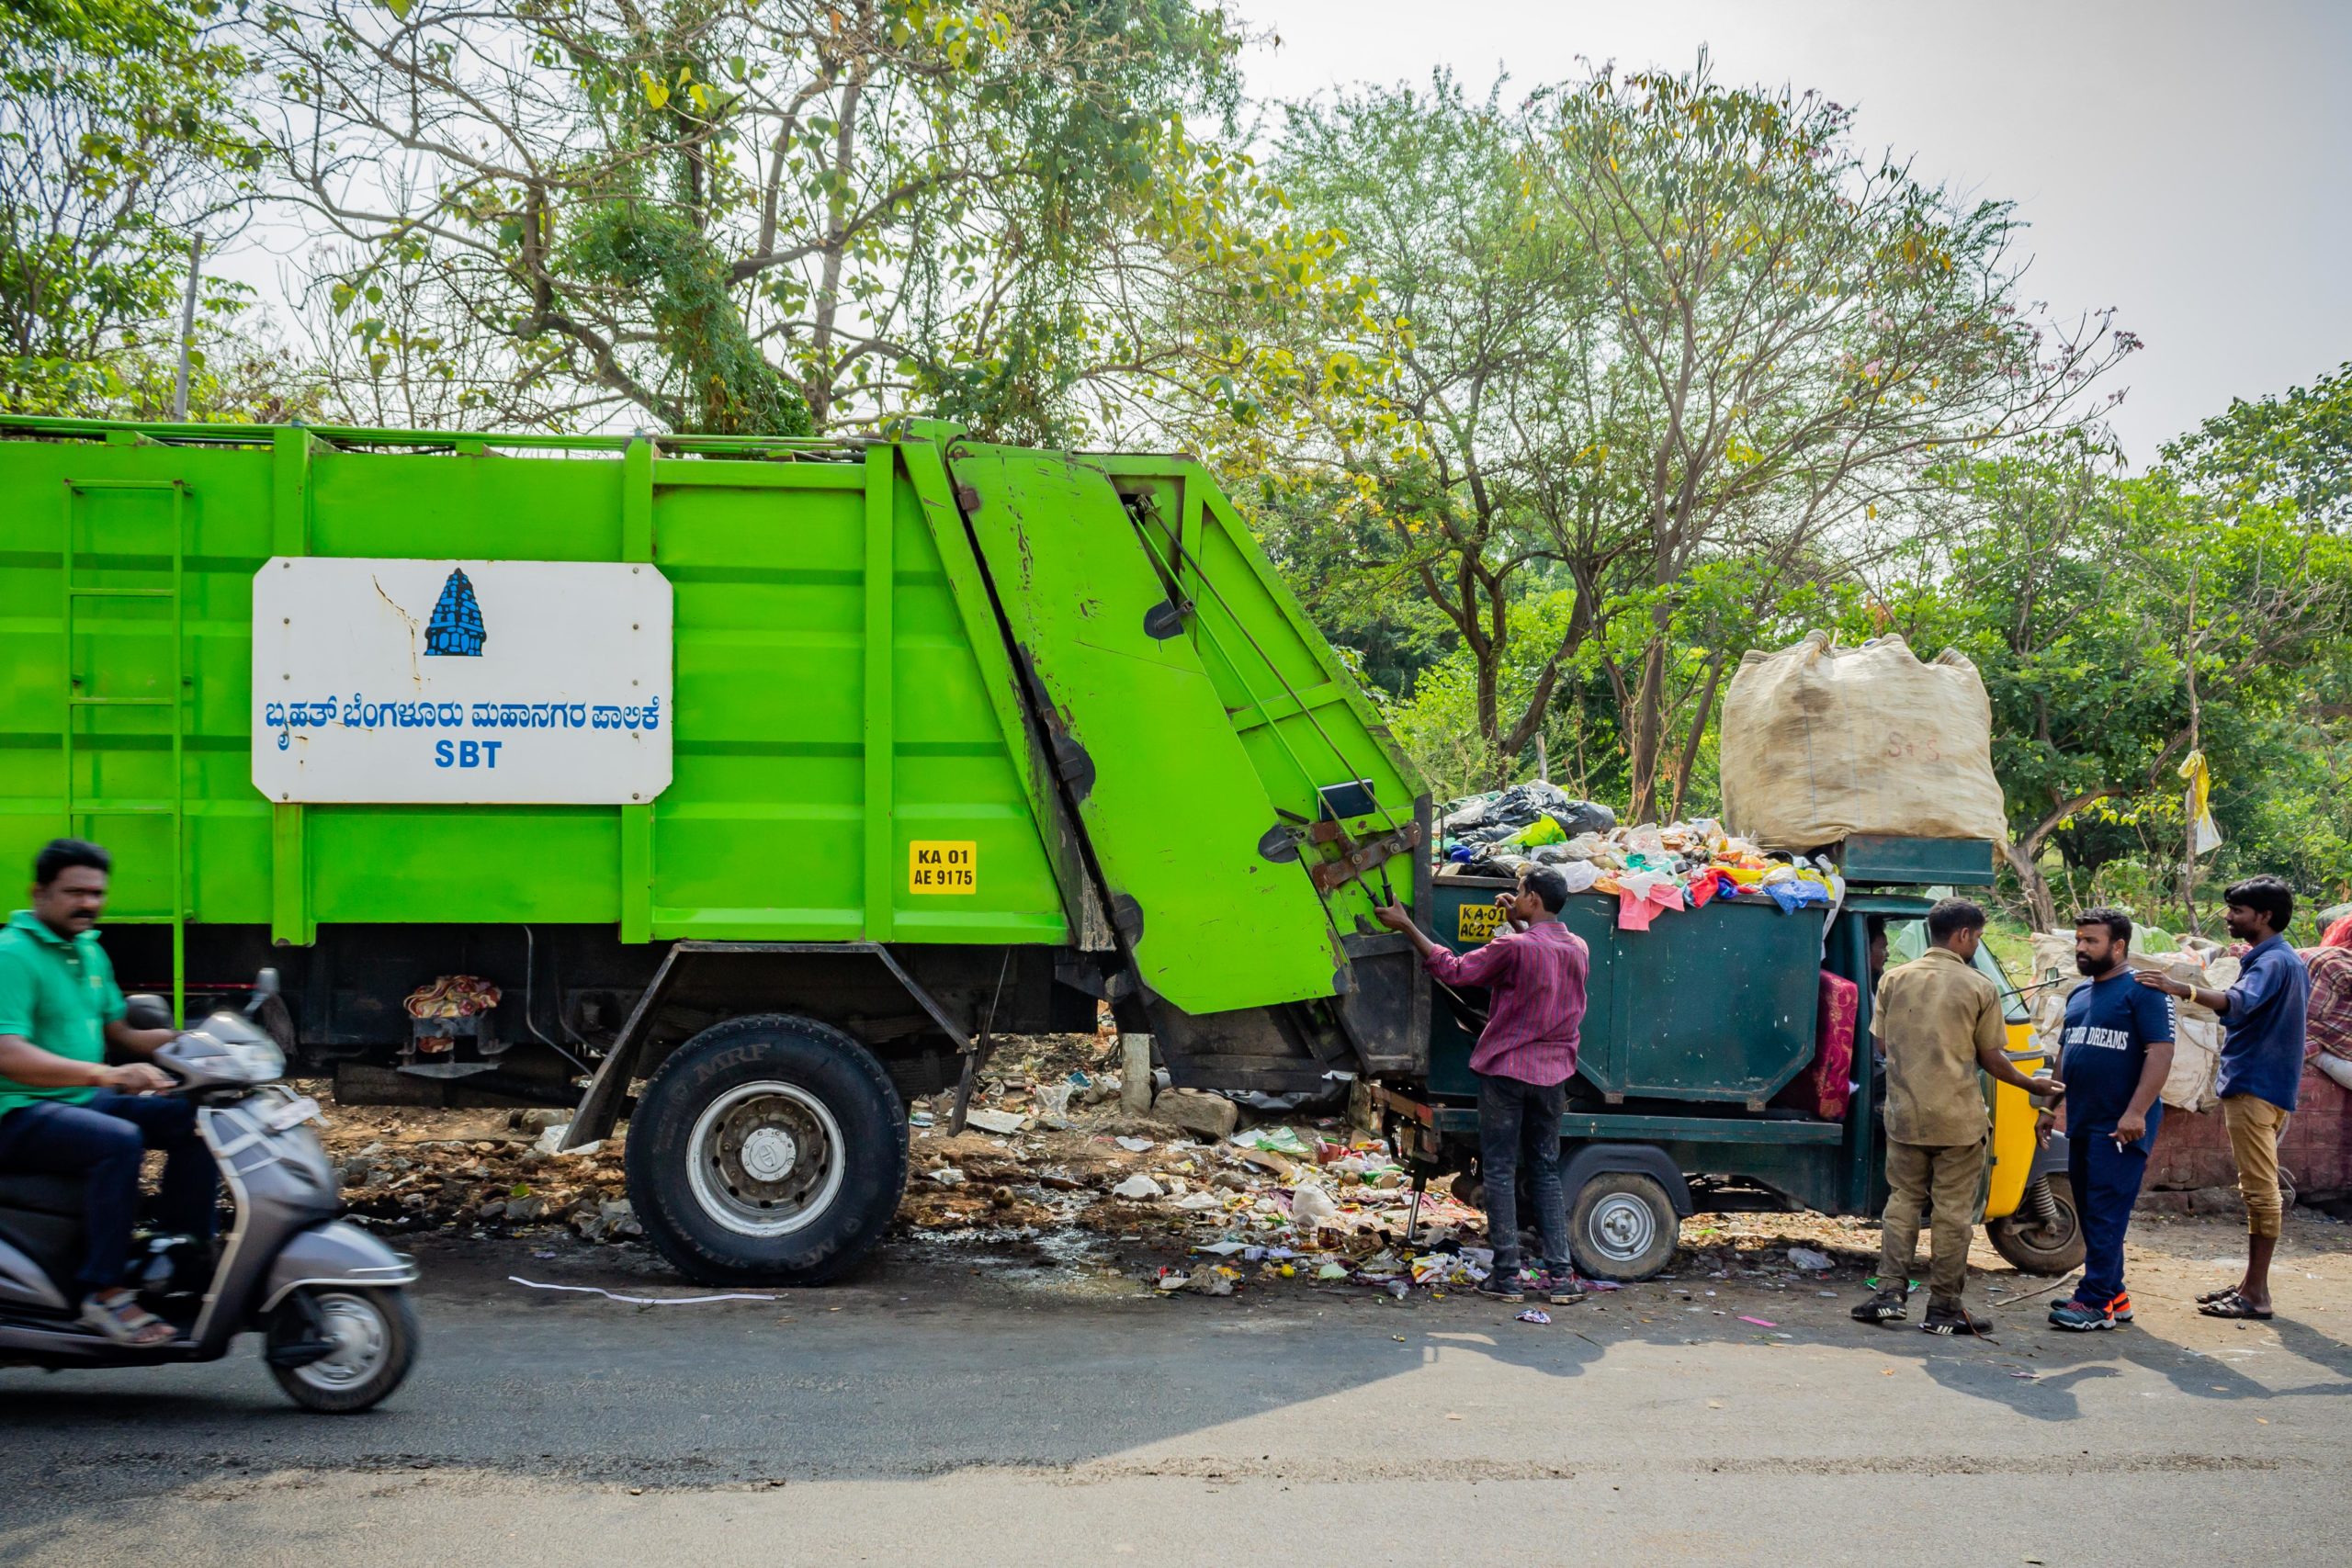 Waste segregation at source sees a jump in Bengaluru